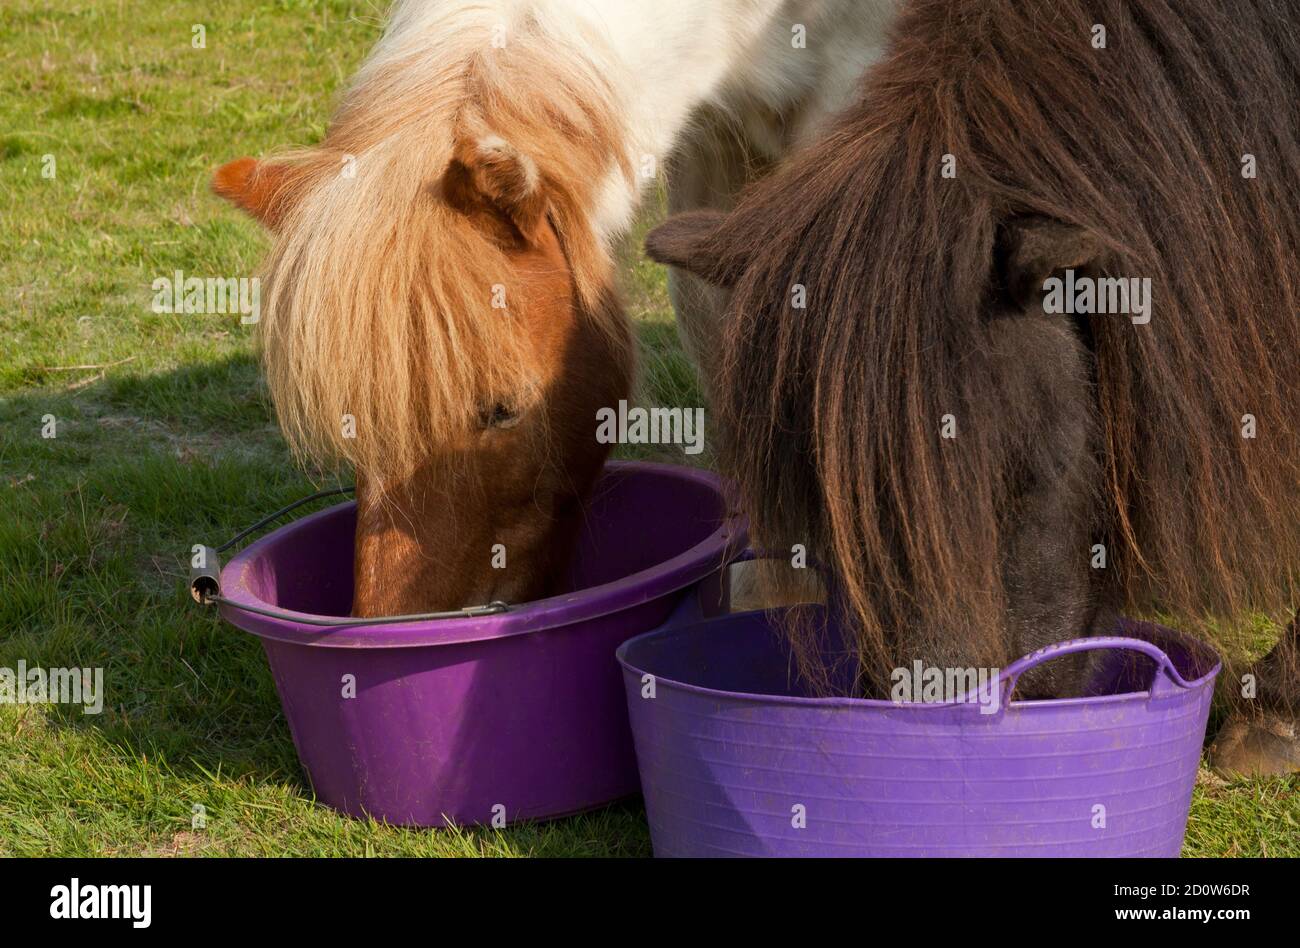 Two ponies eat breakfast together Stock Photo